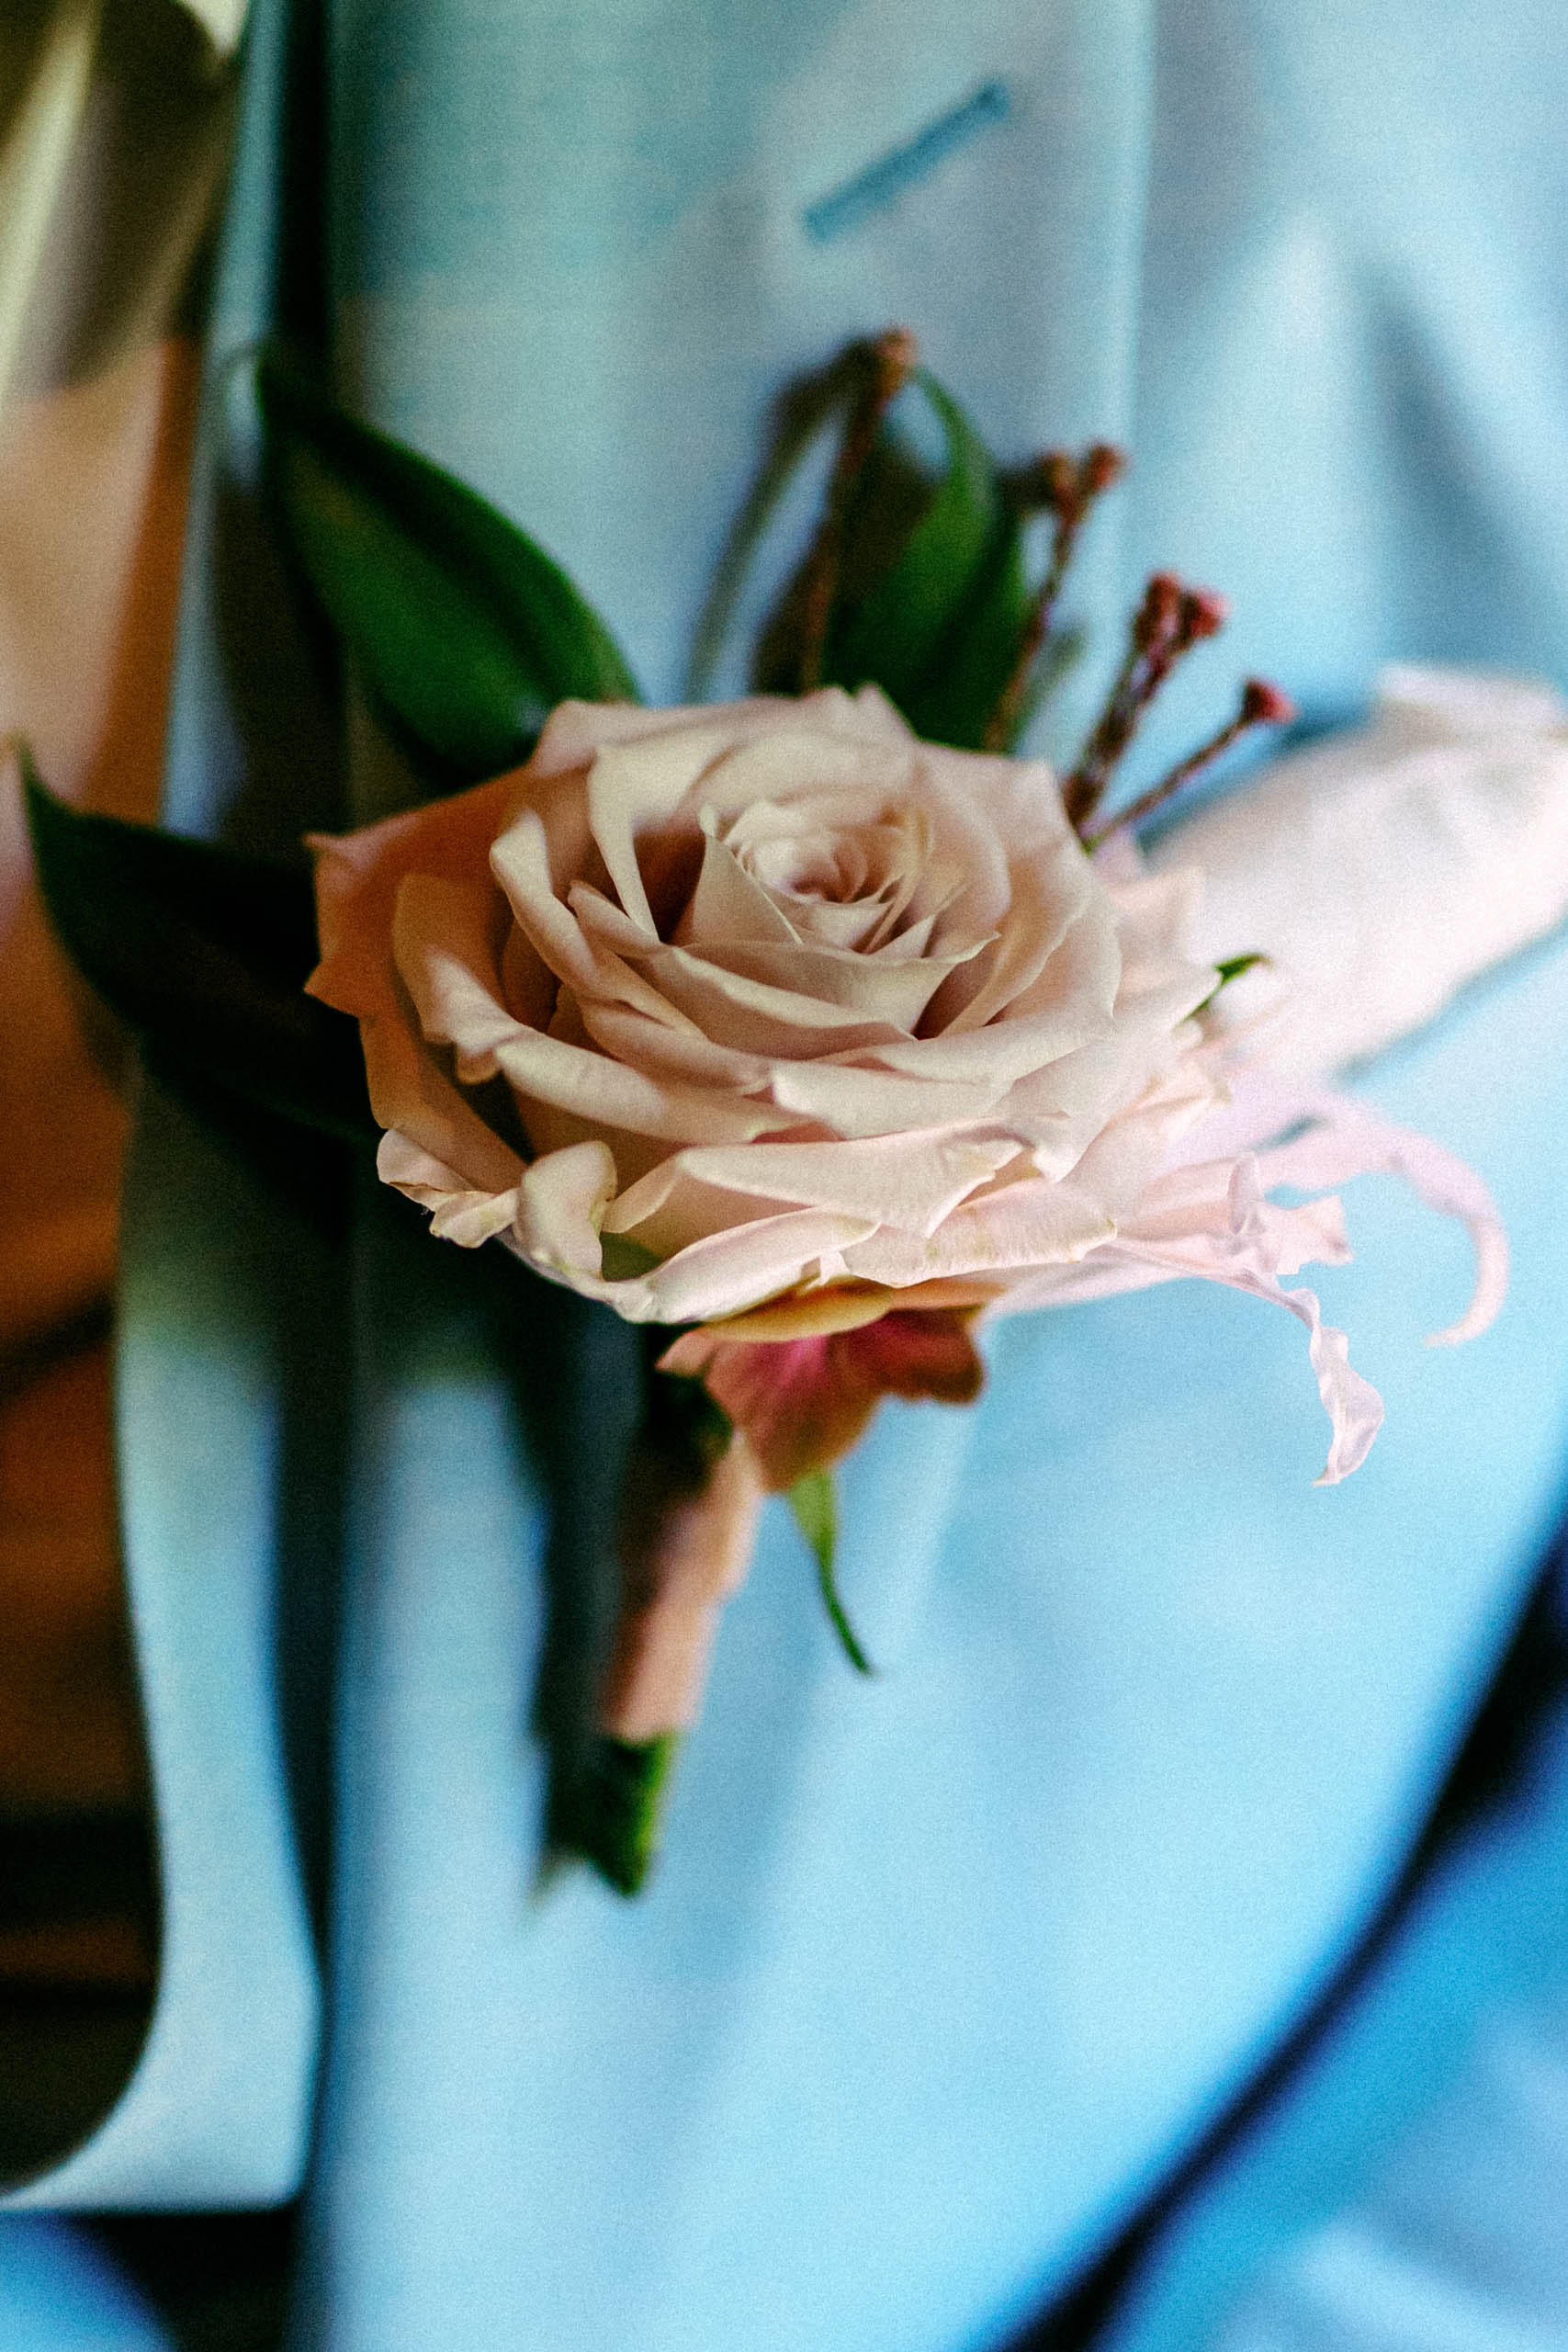 Corsage with a pink rose and plaster powder to the groom.